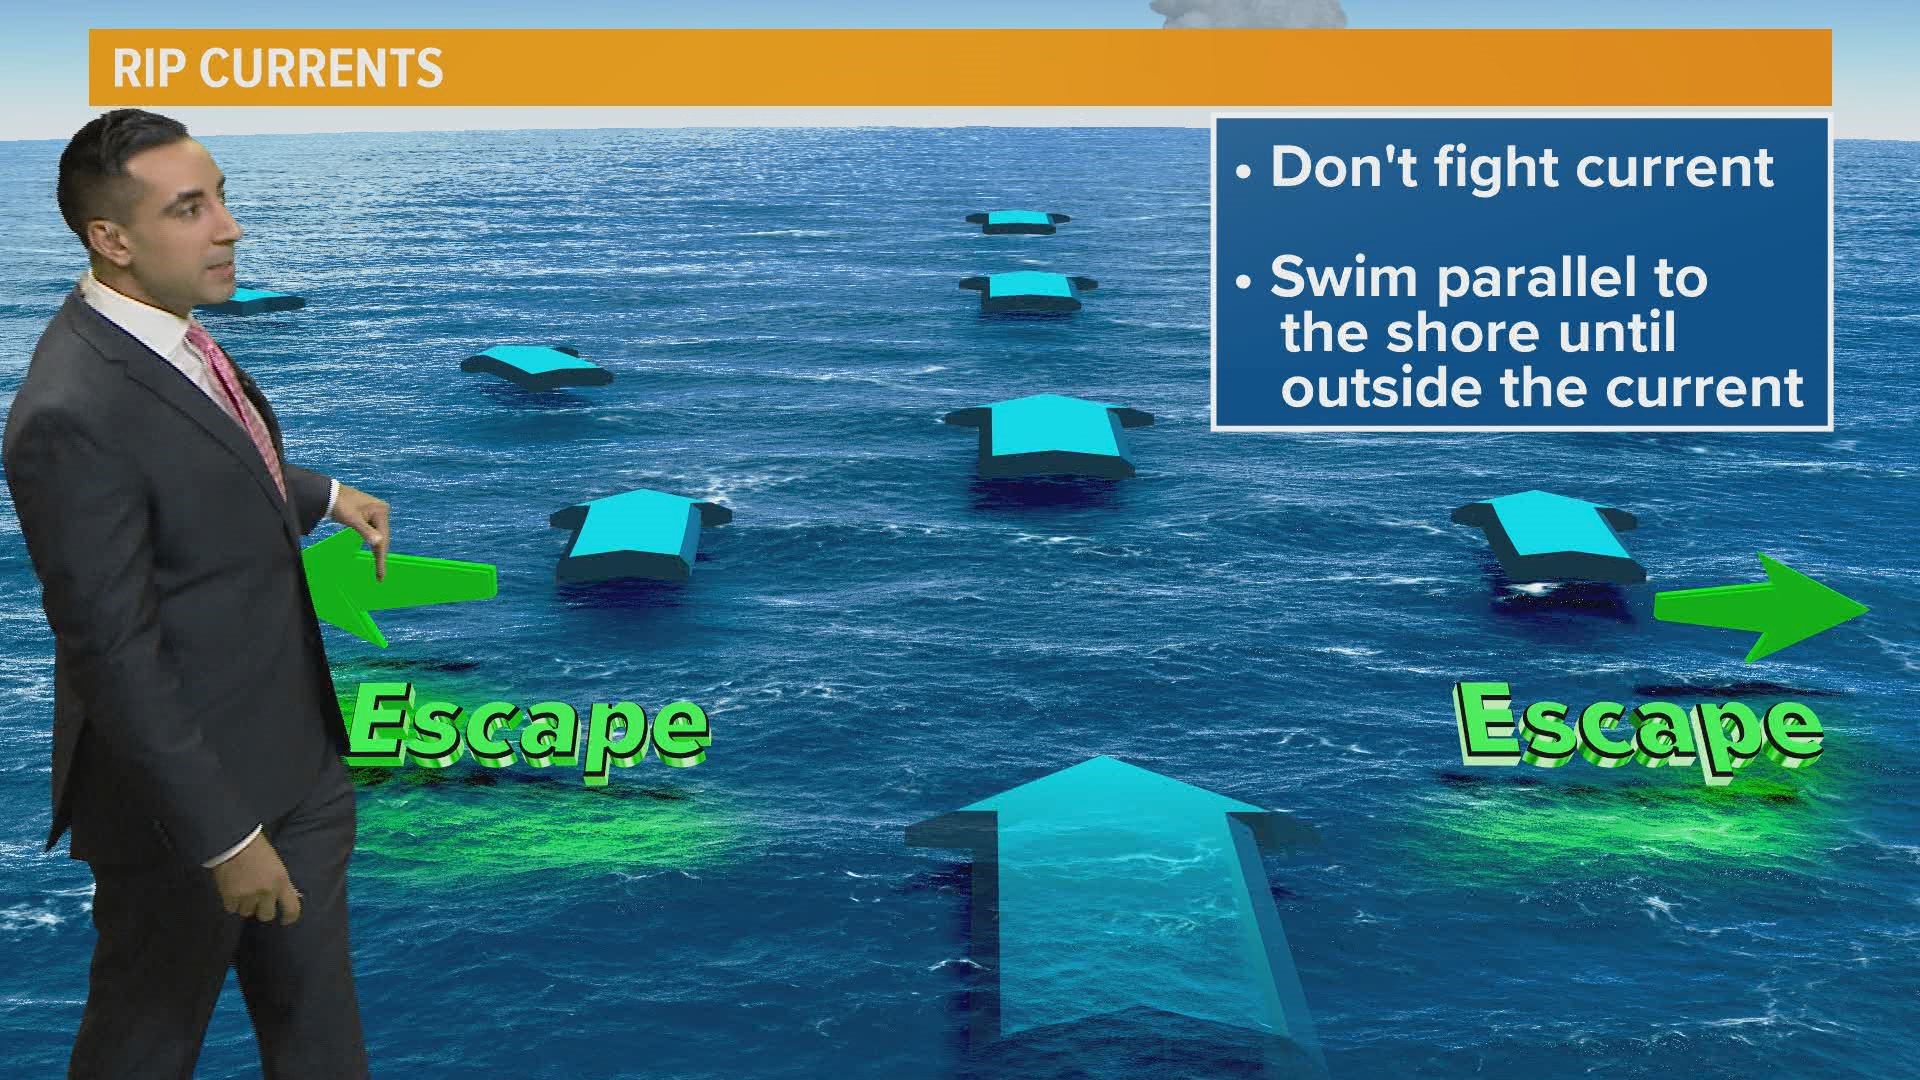 What are rip currents, how do you avoid them and what do you do if you're caught in one?